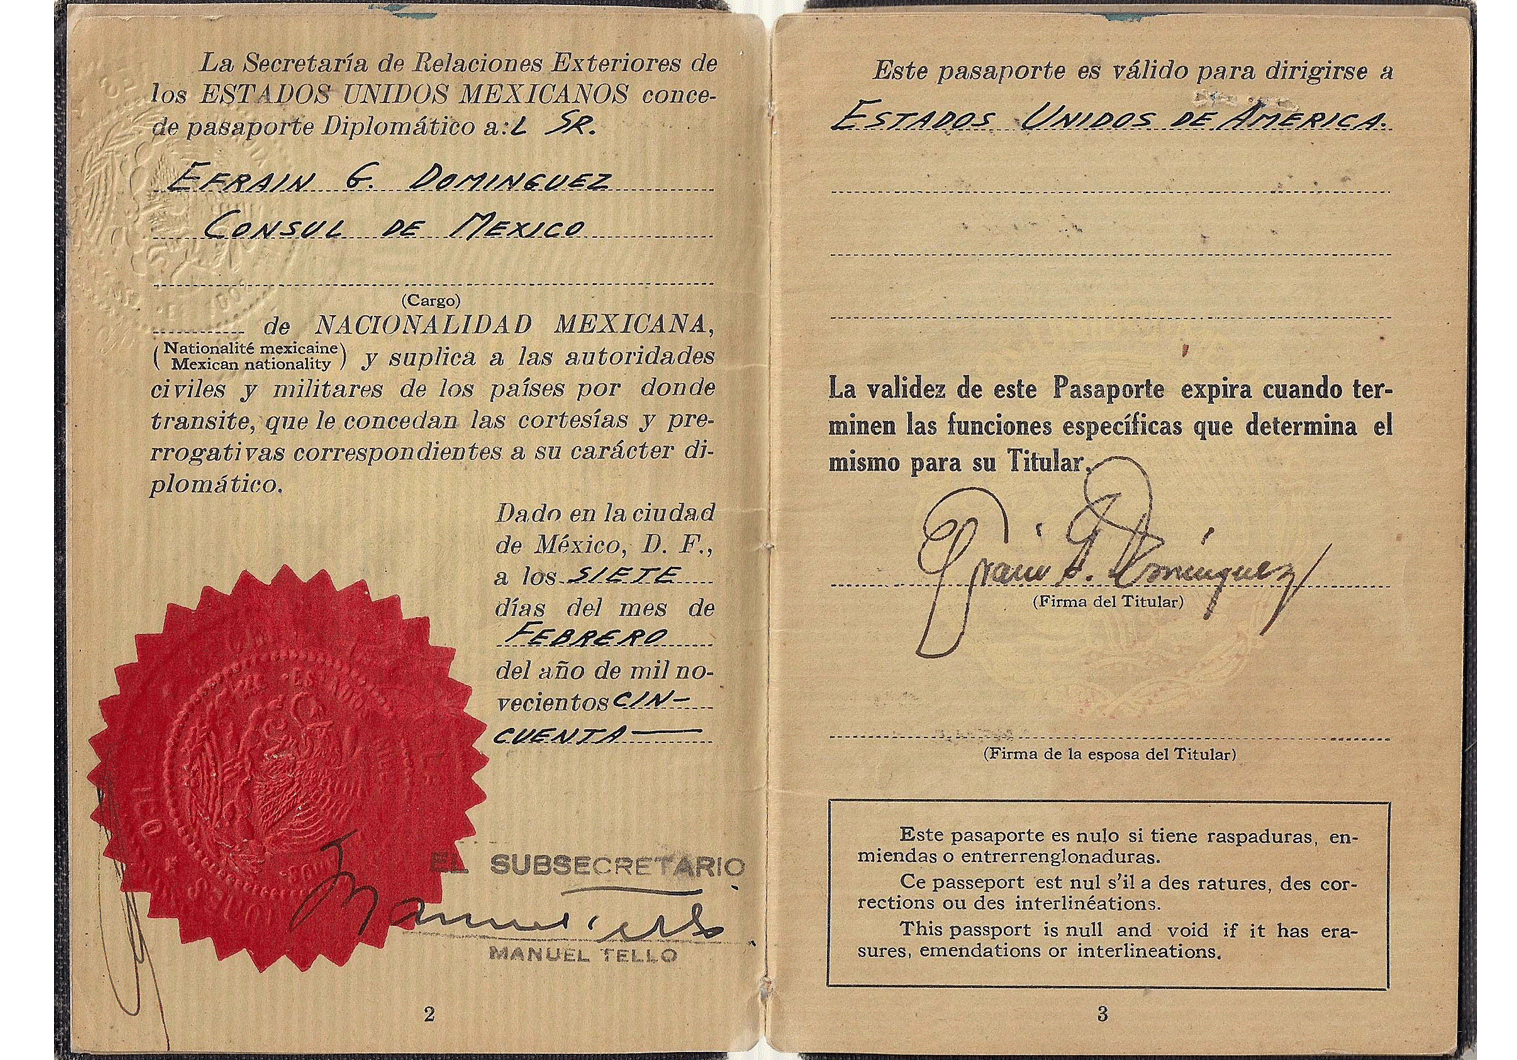 Mexican diplomatic passport